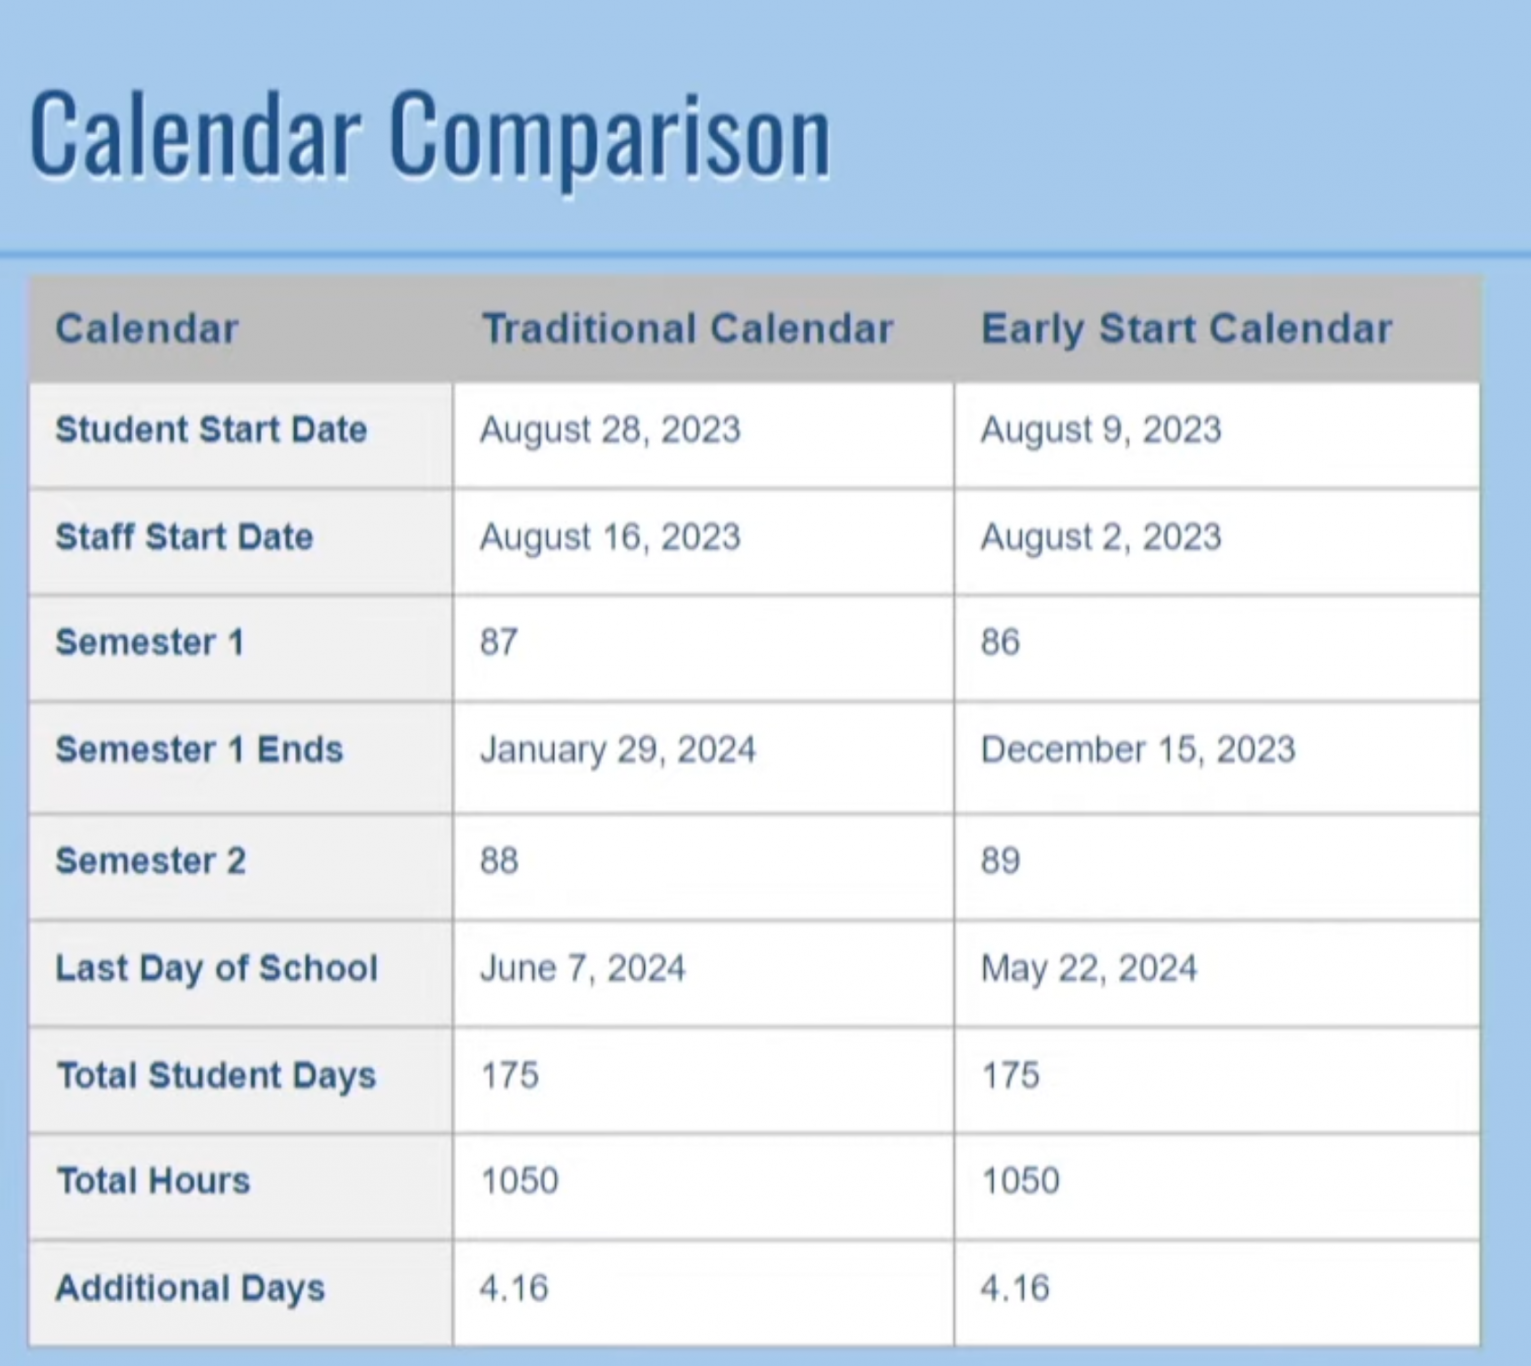 Stanly County Schools adopts early start calendar - The Stanly